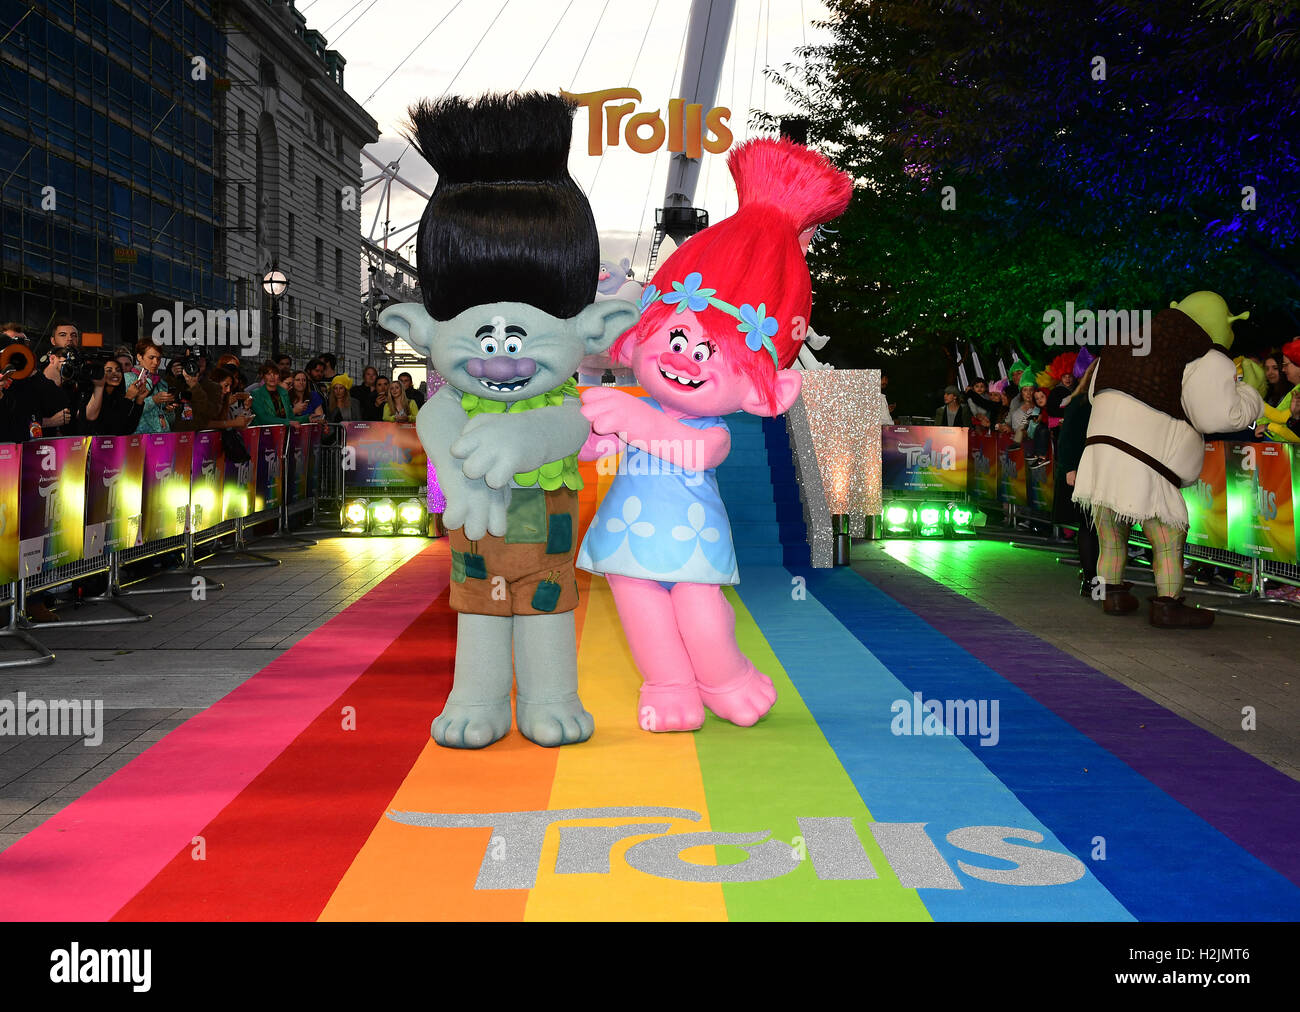 https://c8.alamy.com/comp/H2JMT6/branch-and-poppy-characters-from-the-film-attending-the-trolls-special-H2JMT6.jpg